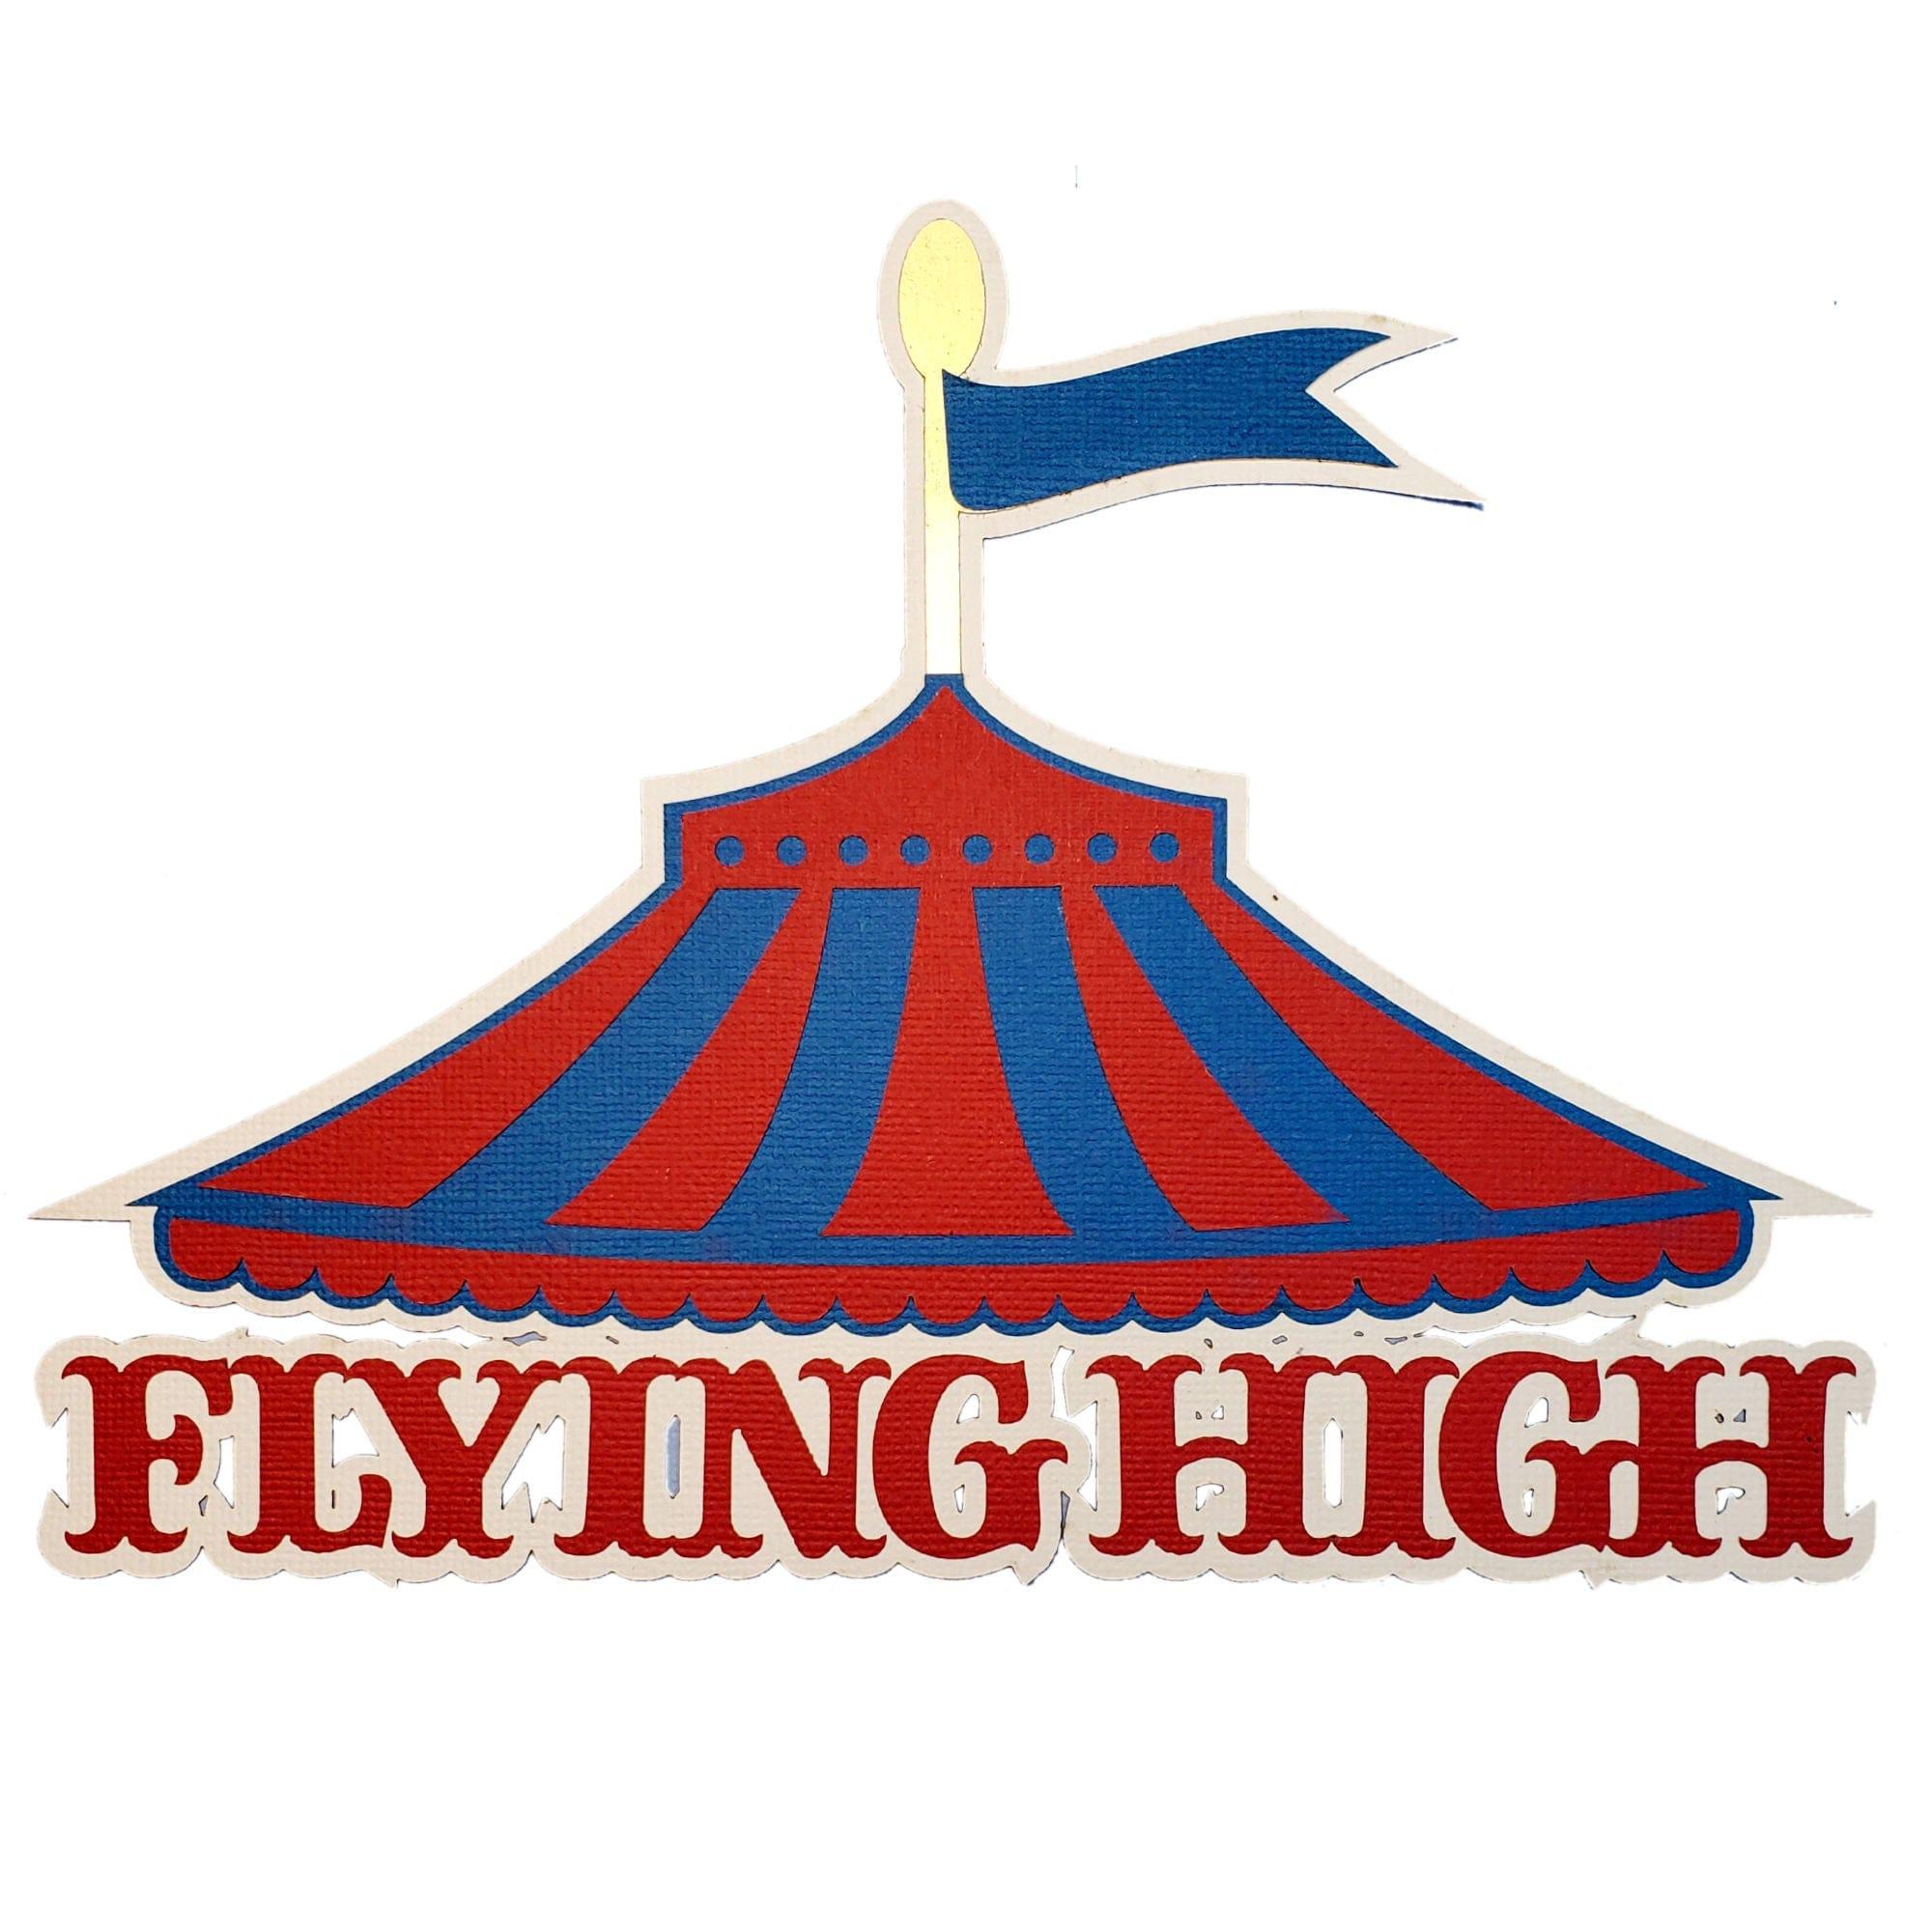 Flying High Circus Tent Rooftop Fully-Assembled 7 x 8 Title Laser Cut Scrapbook Embellishment by SSC Laser Designs